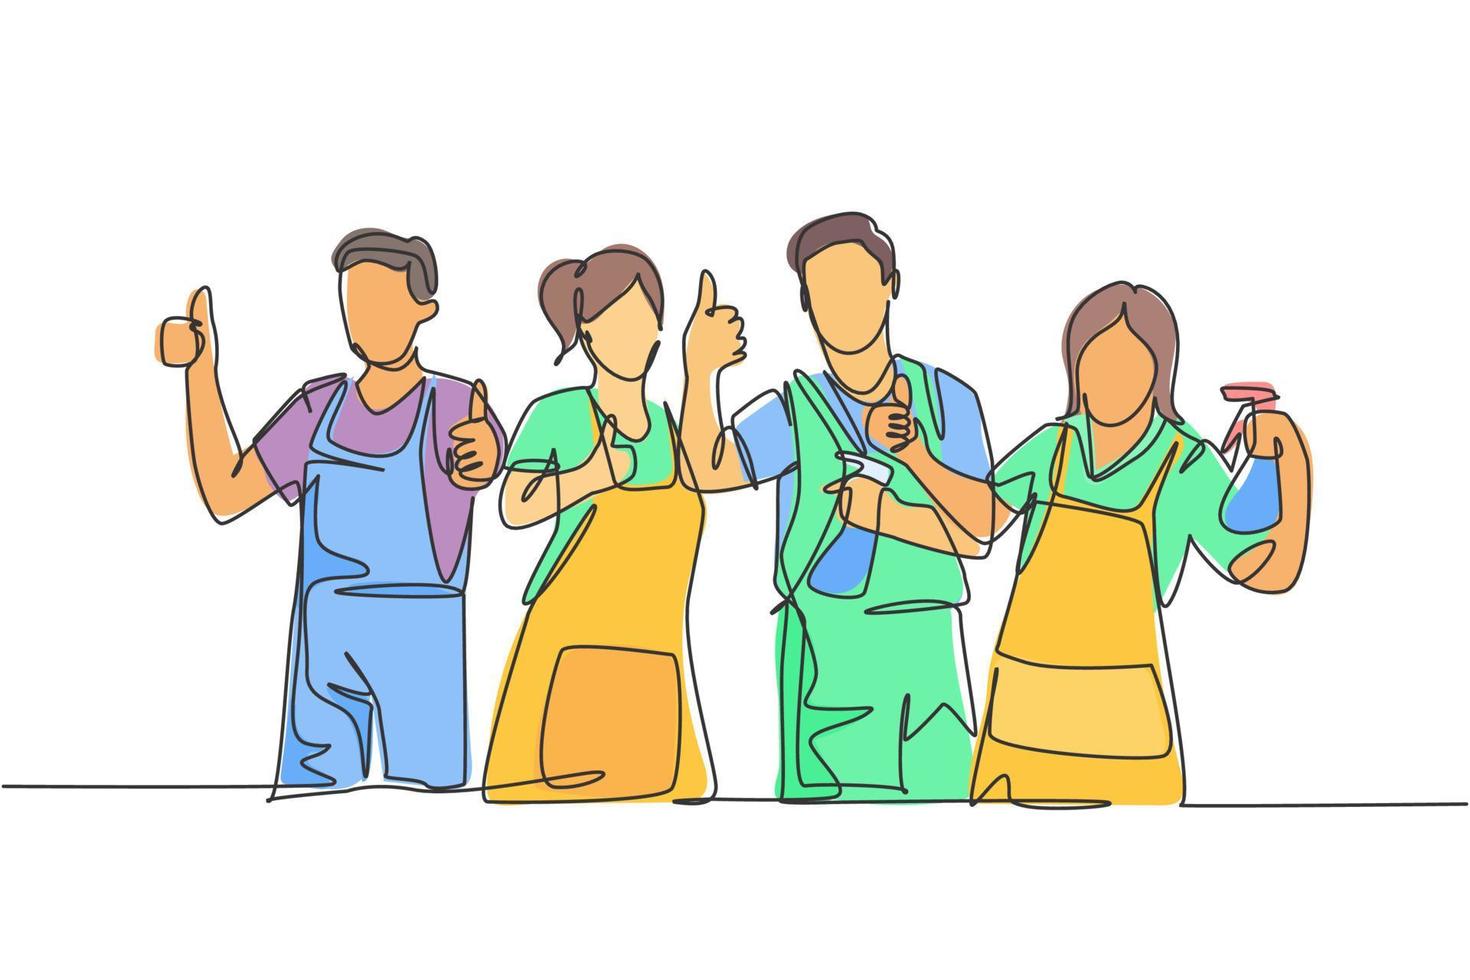 One line drawing of groups of group male and female janitor giving thumbs up gesture. Cleaning service teamwork concept. Continuous line draw design vector illustration